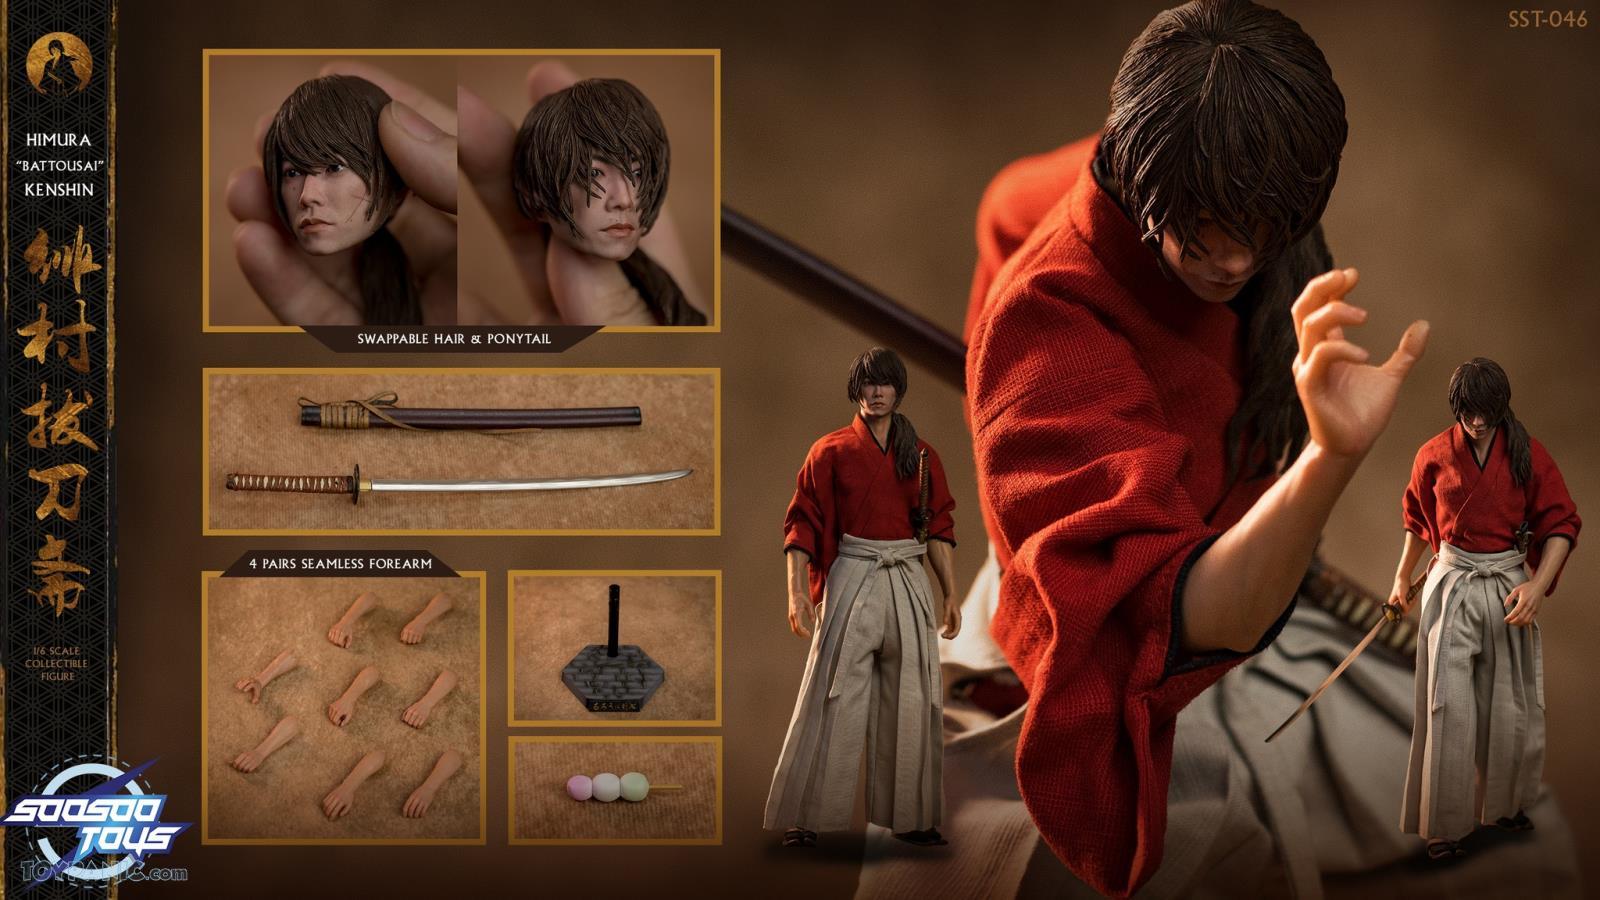 kenshin - NEW PRODUCT: 1/6 scale Rurouni Kenshin Collectible Figure from SooSooToys 712202251234PM_474230